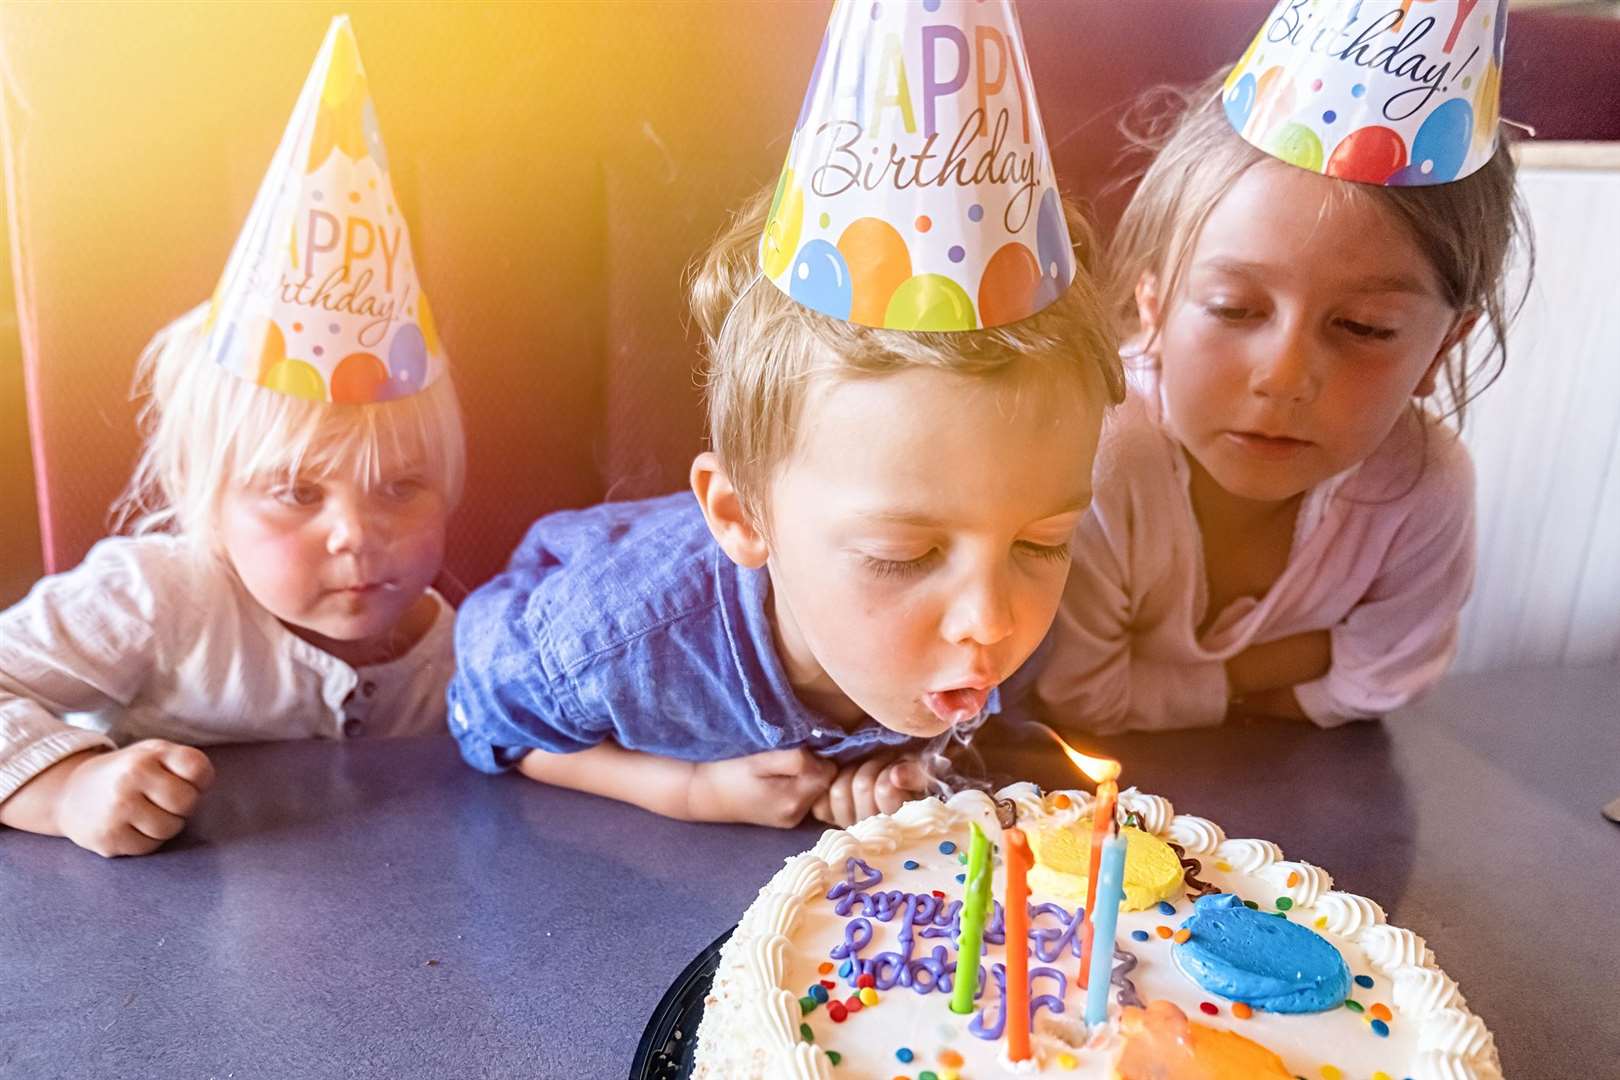 Is the tradition of blowing out candles no longer socially acceptable after the pandemic?